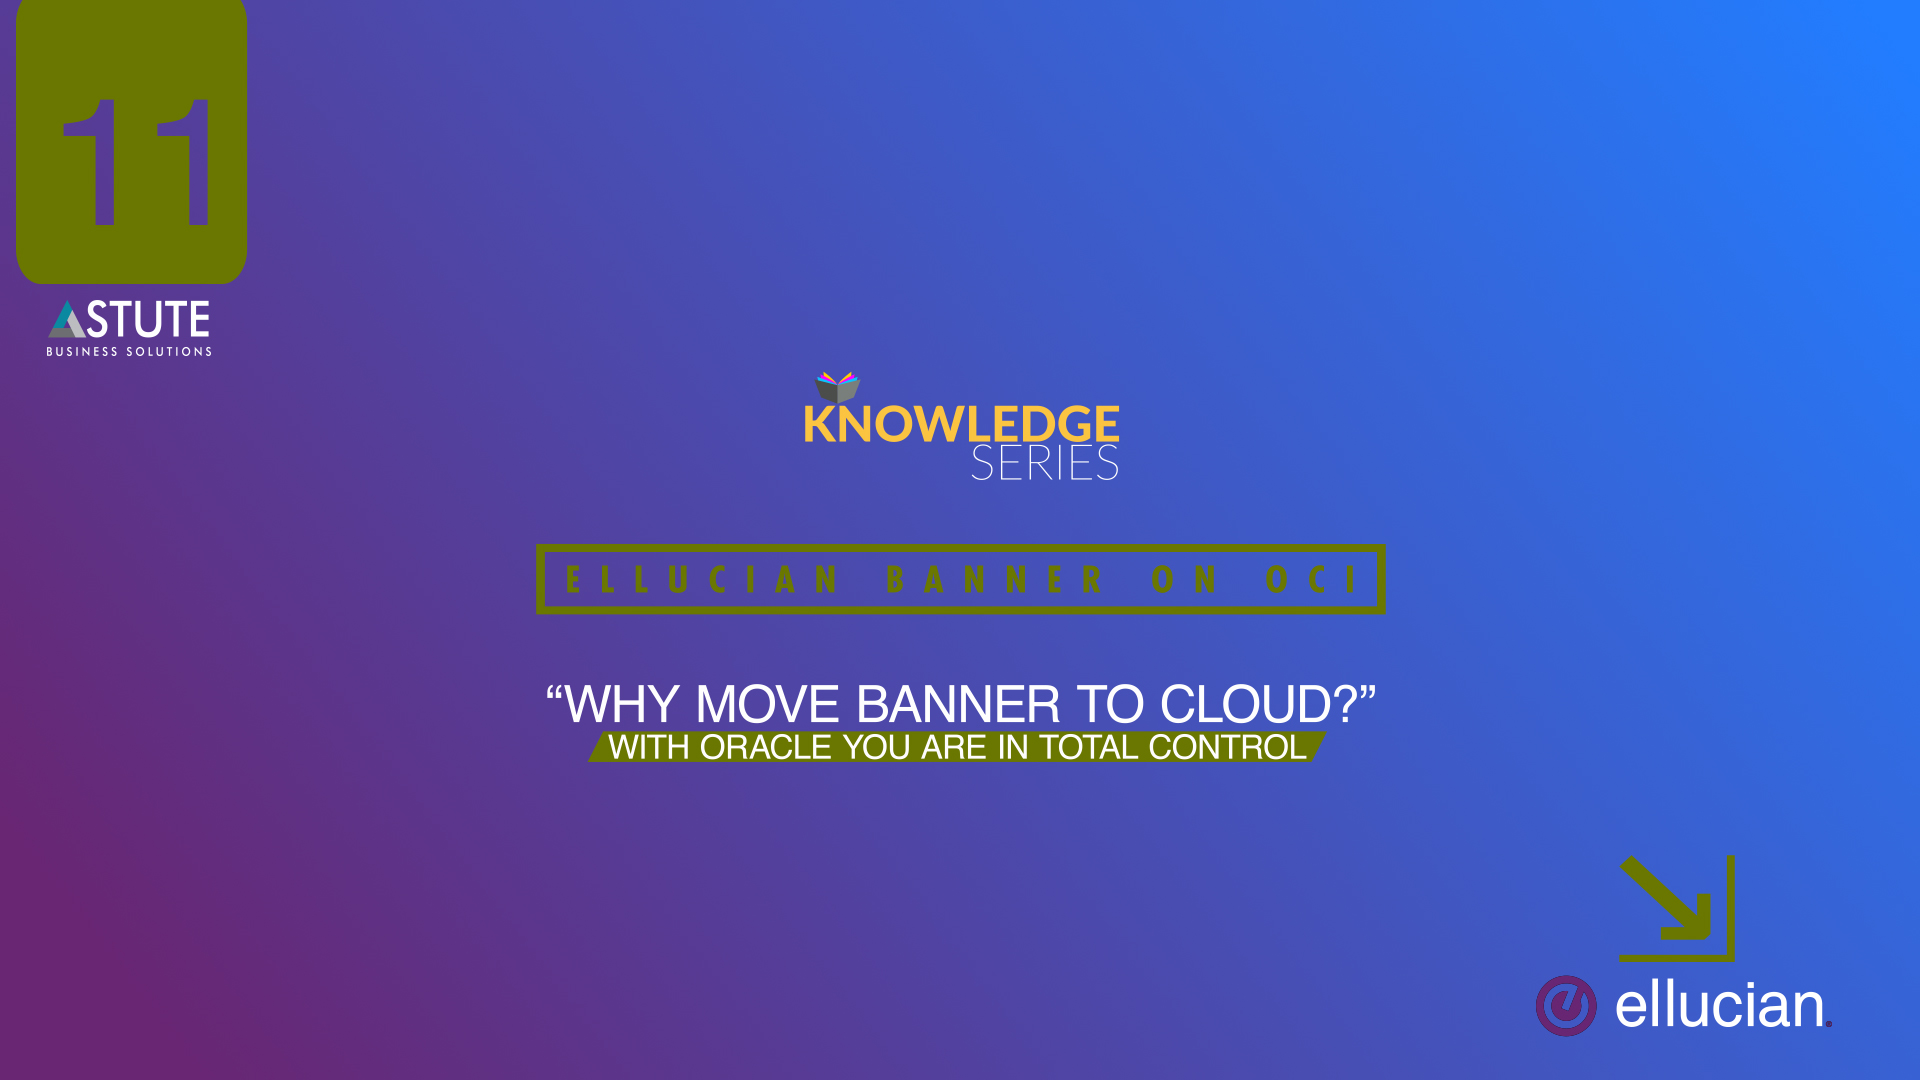 #11 Ellucian _Why Move Banner To Cloud_- With Oracle you are in total control